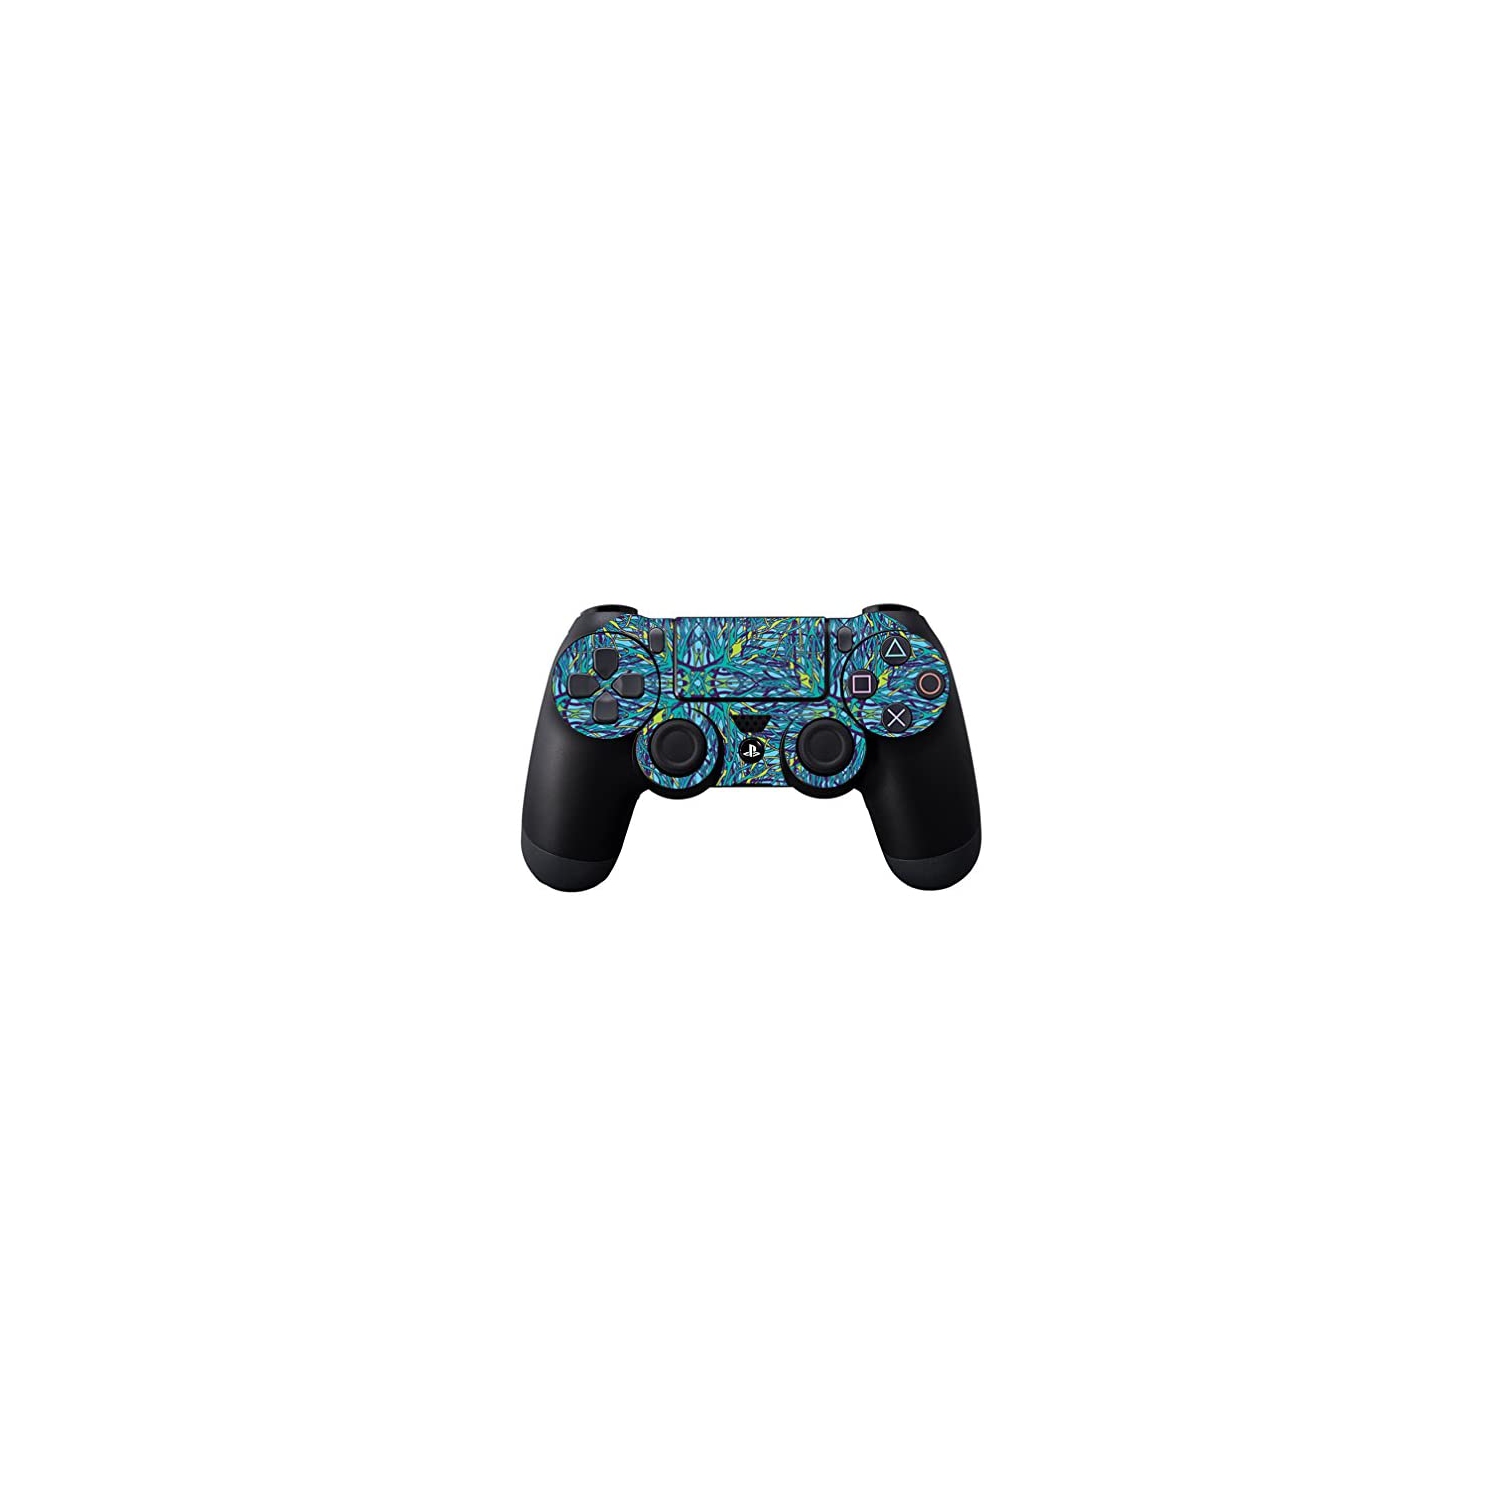 MightySkins Skin Compatible With Sony PlayStation DualShock PS4 Controller Case wrap cover sticker skins Blue Veins